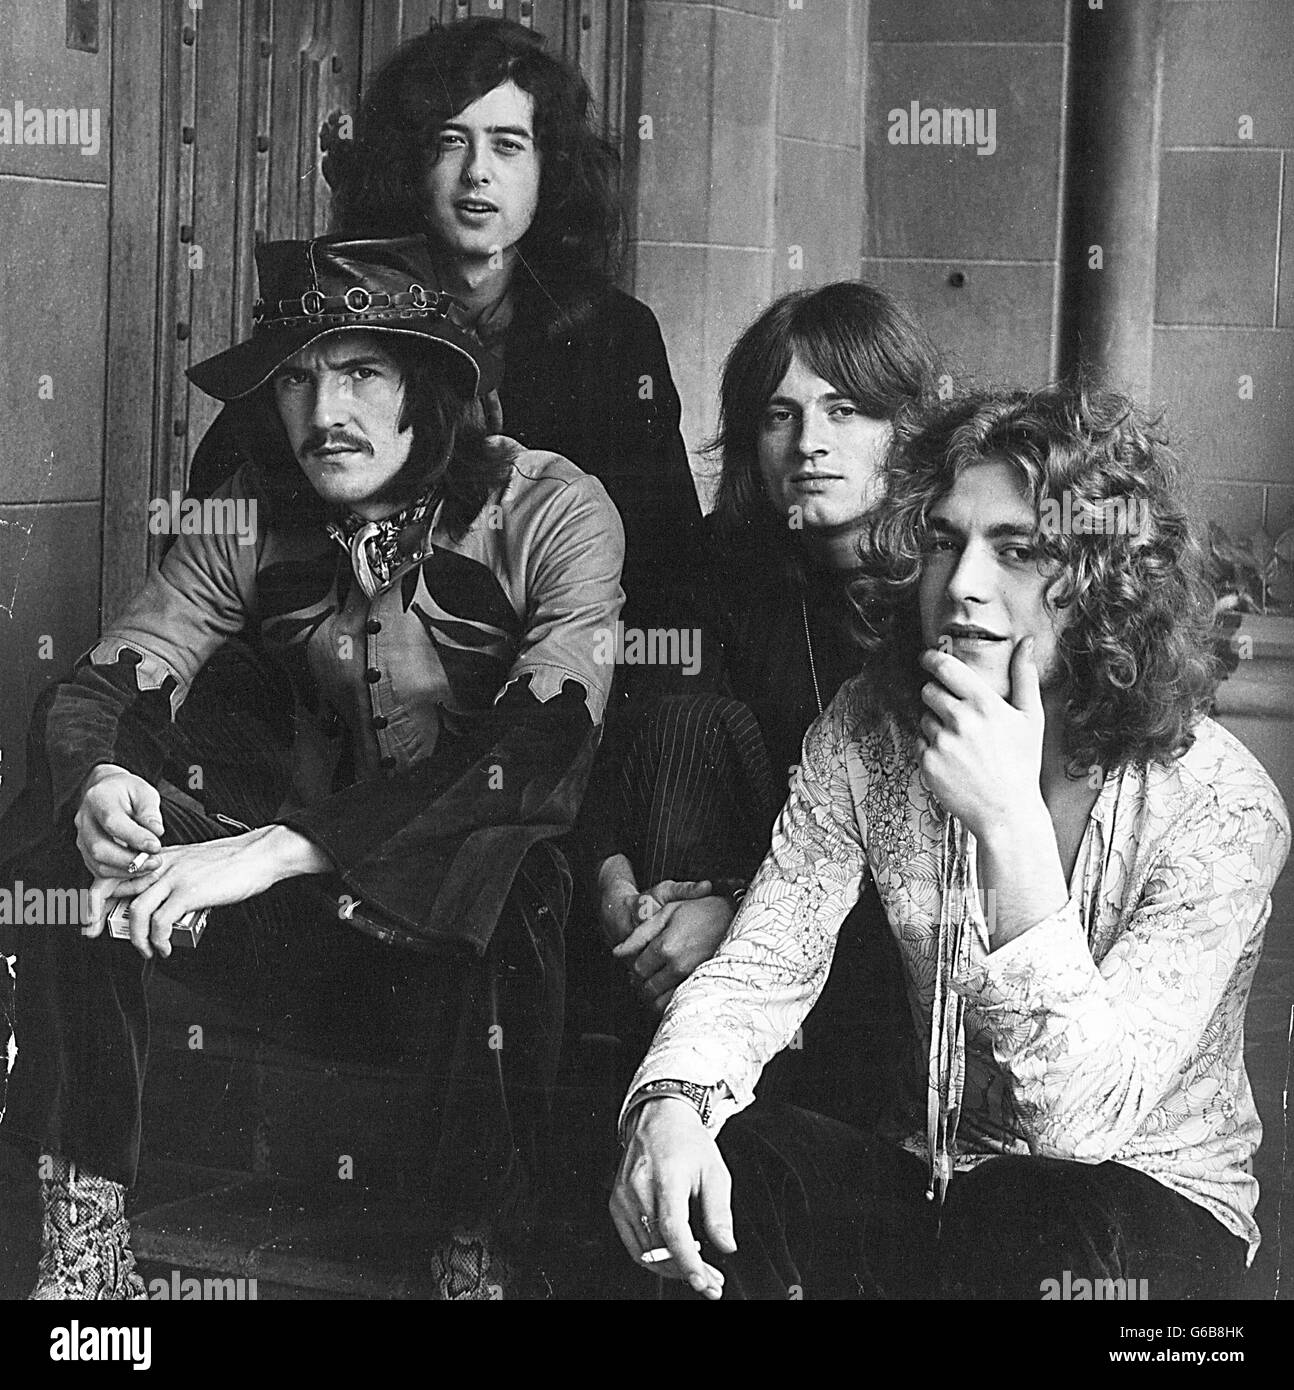 Rektangel bypass opkald June 23, 2016 - Led Zeppelin wins 'Stairway To Heaven' Copyright Lawsuit  after a federal jury decided the band did not plagiarize their signature  track. PICTURED: 1969 - LED ZEPPELIN JIMMY PAGE,